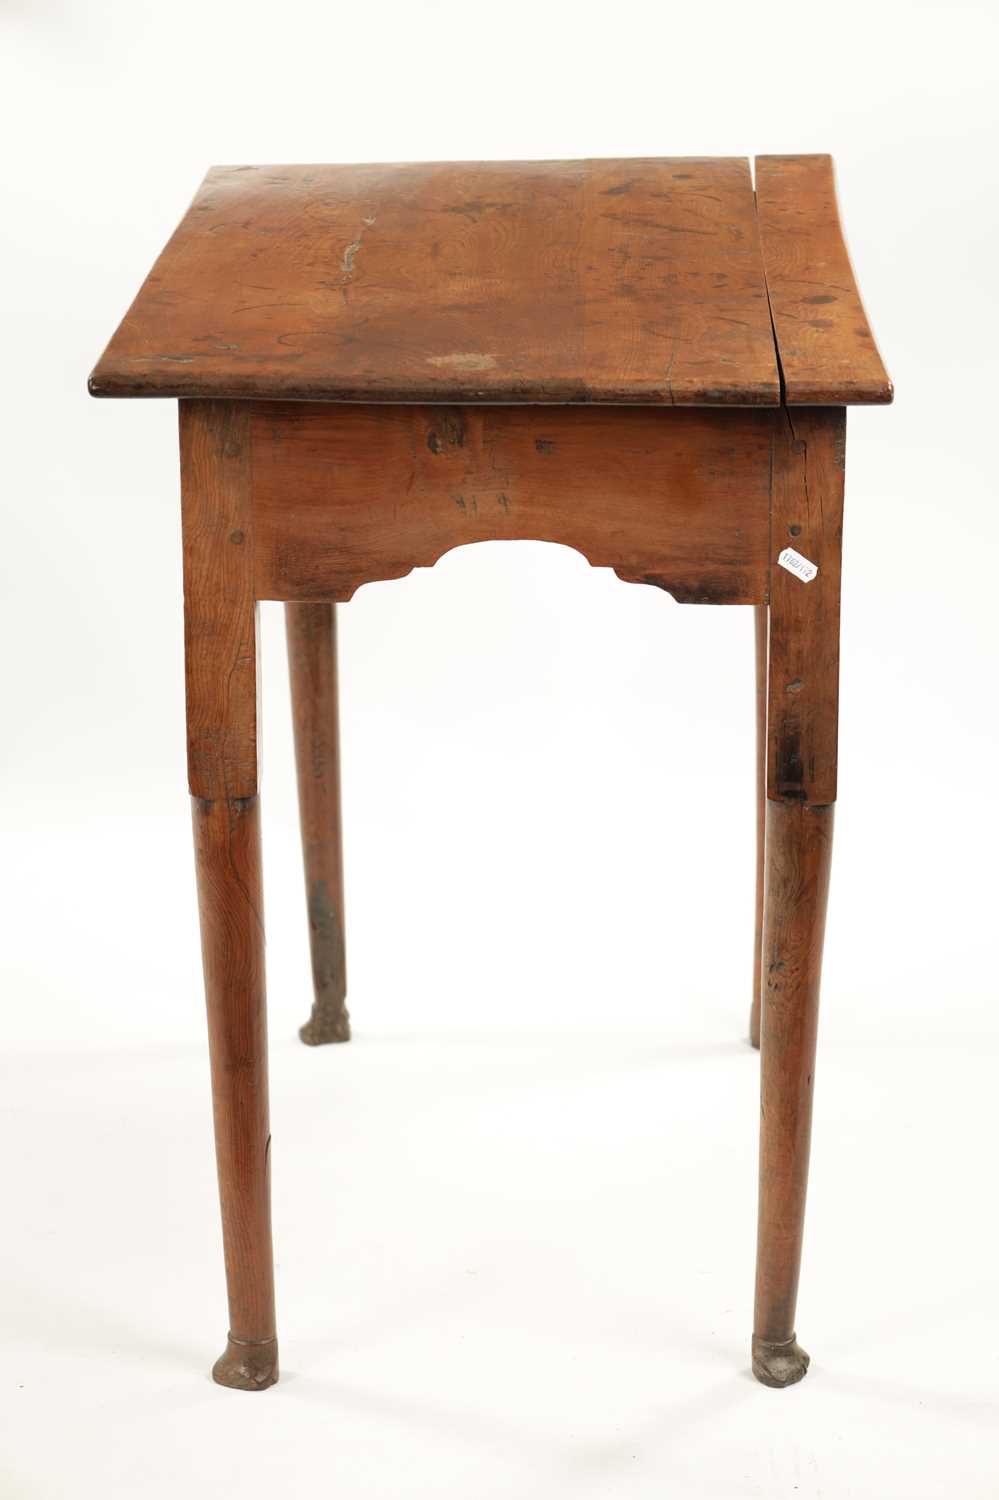 AN EARLY 18TH CENTURY YEW WOOD SIDE TABLE - Image 7 of 7